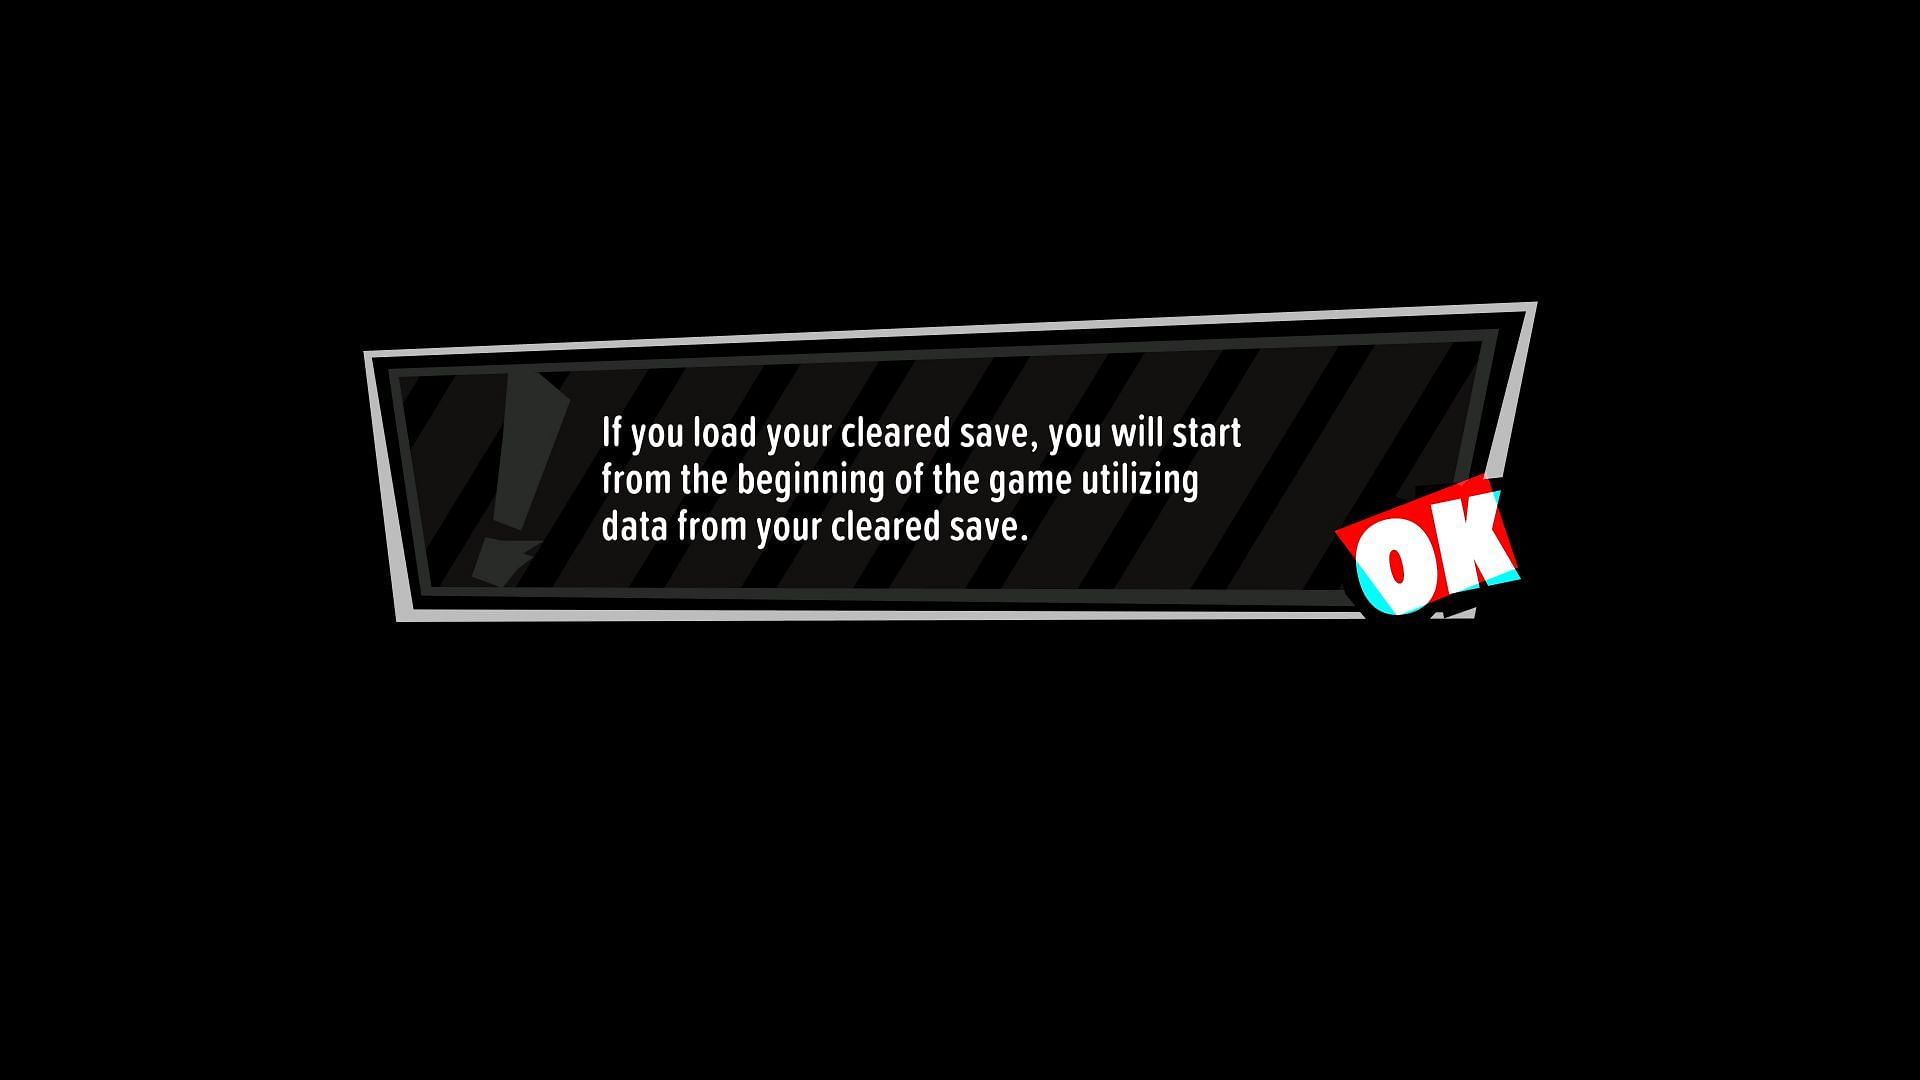 You can start a New Game Plus with Cleared Save (Image via Atlus)